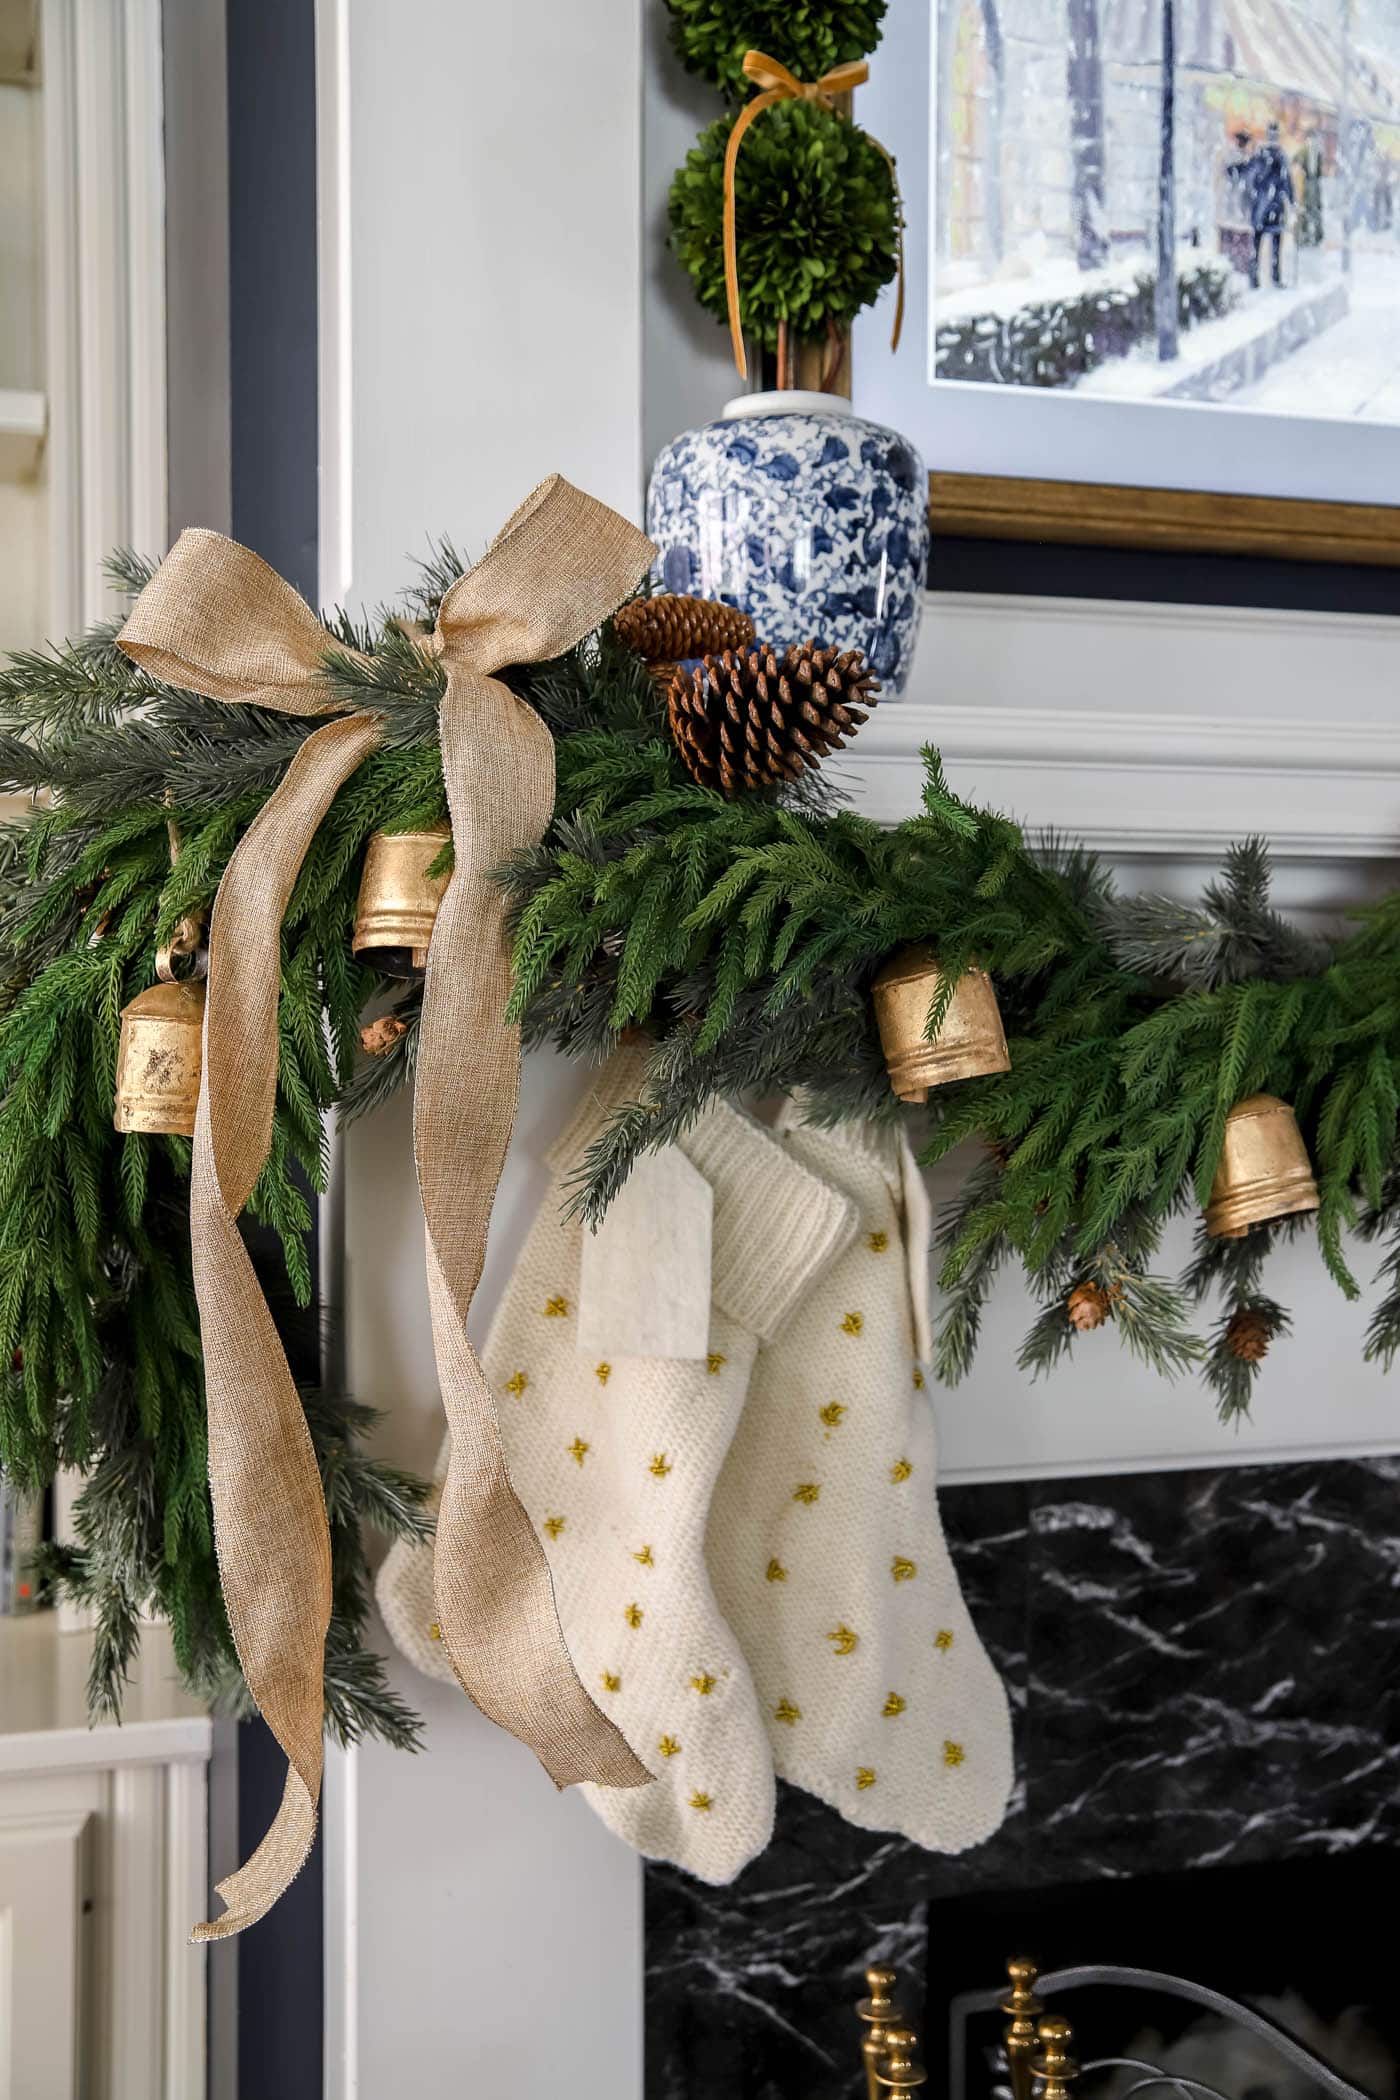 gold, blue and White Christmas decor on the mantel